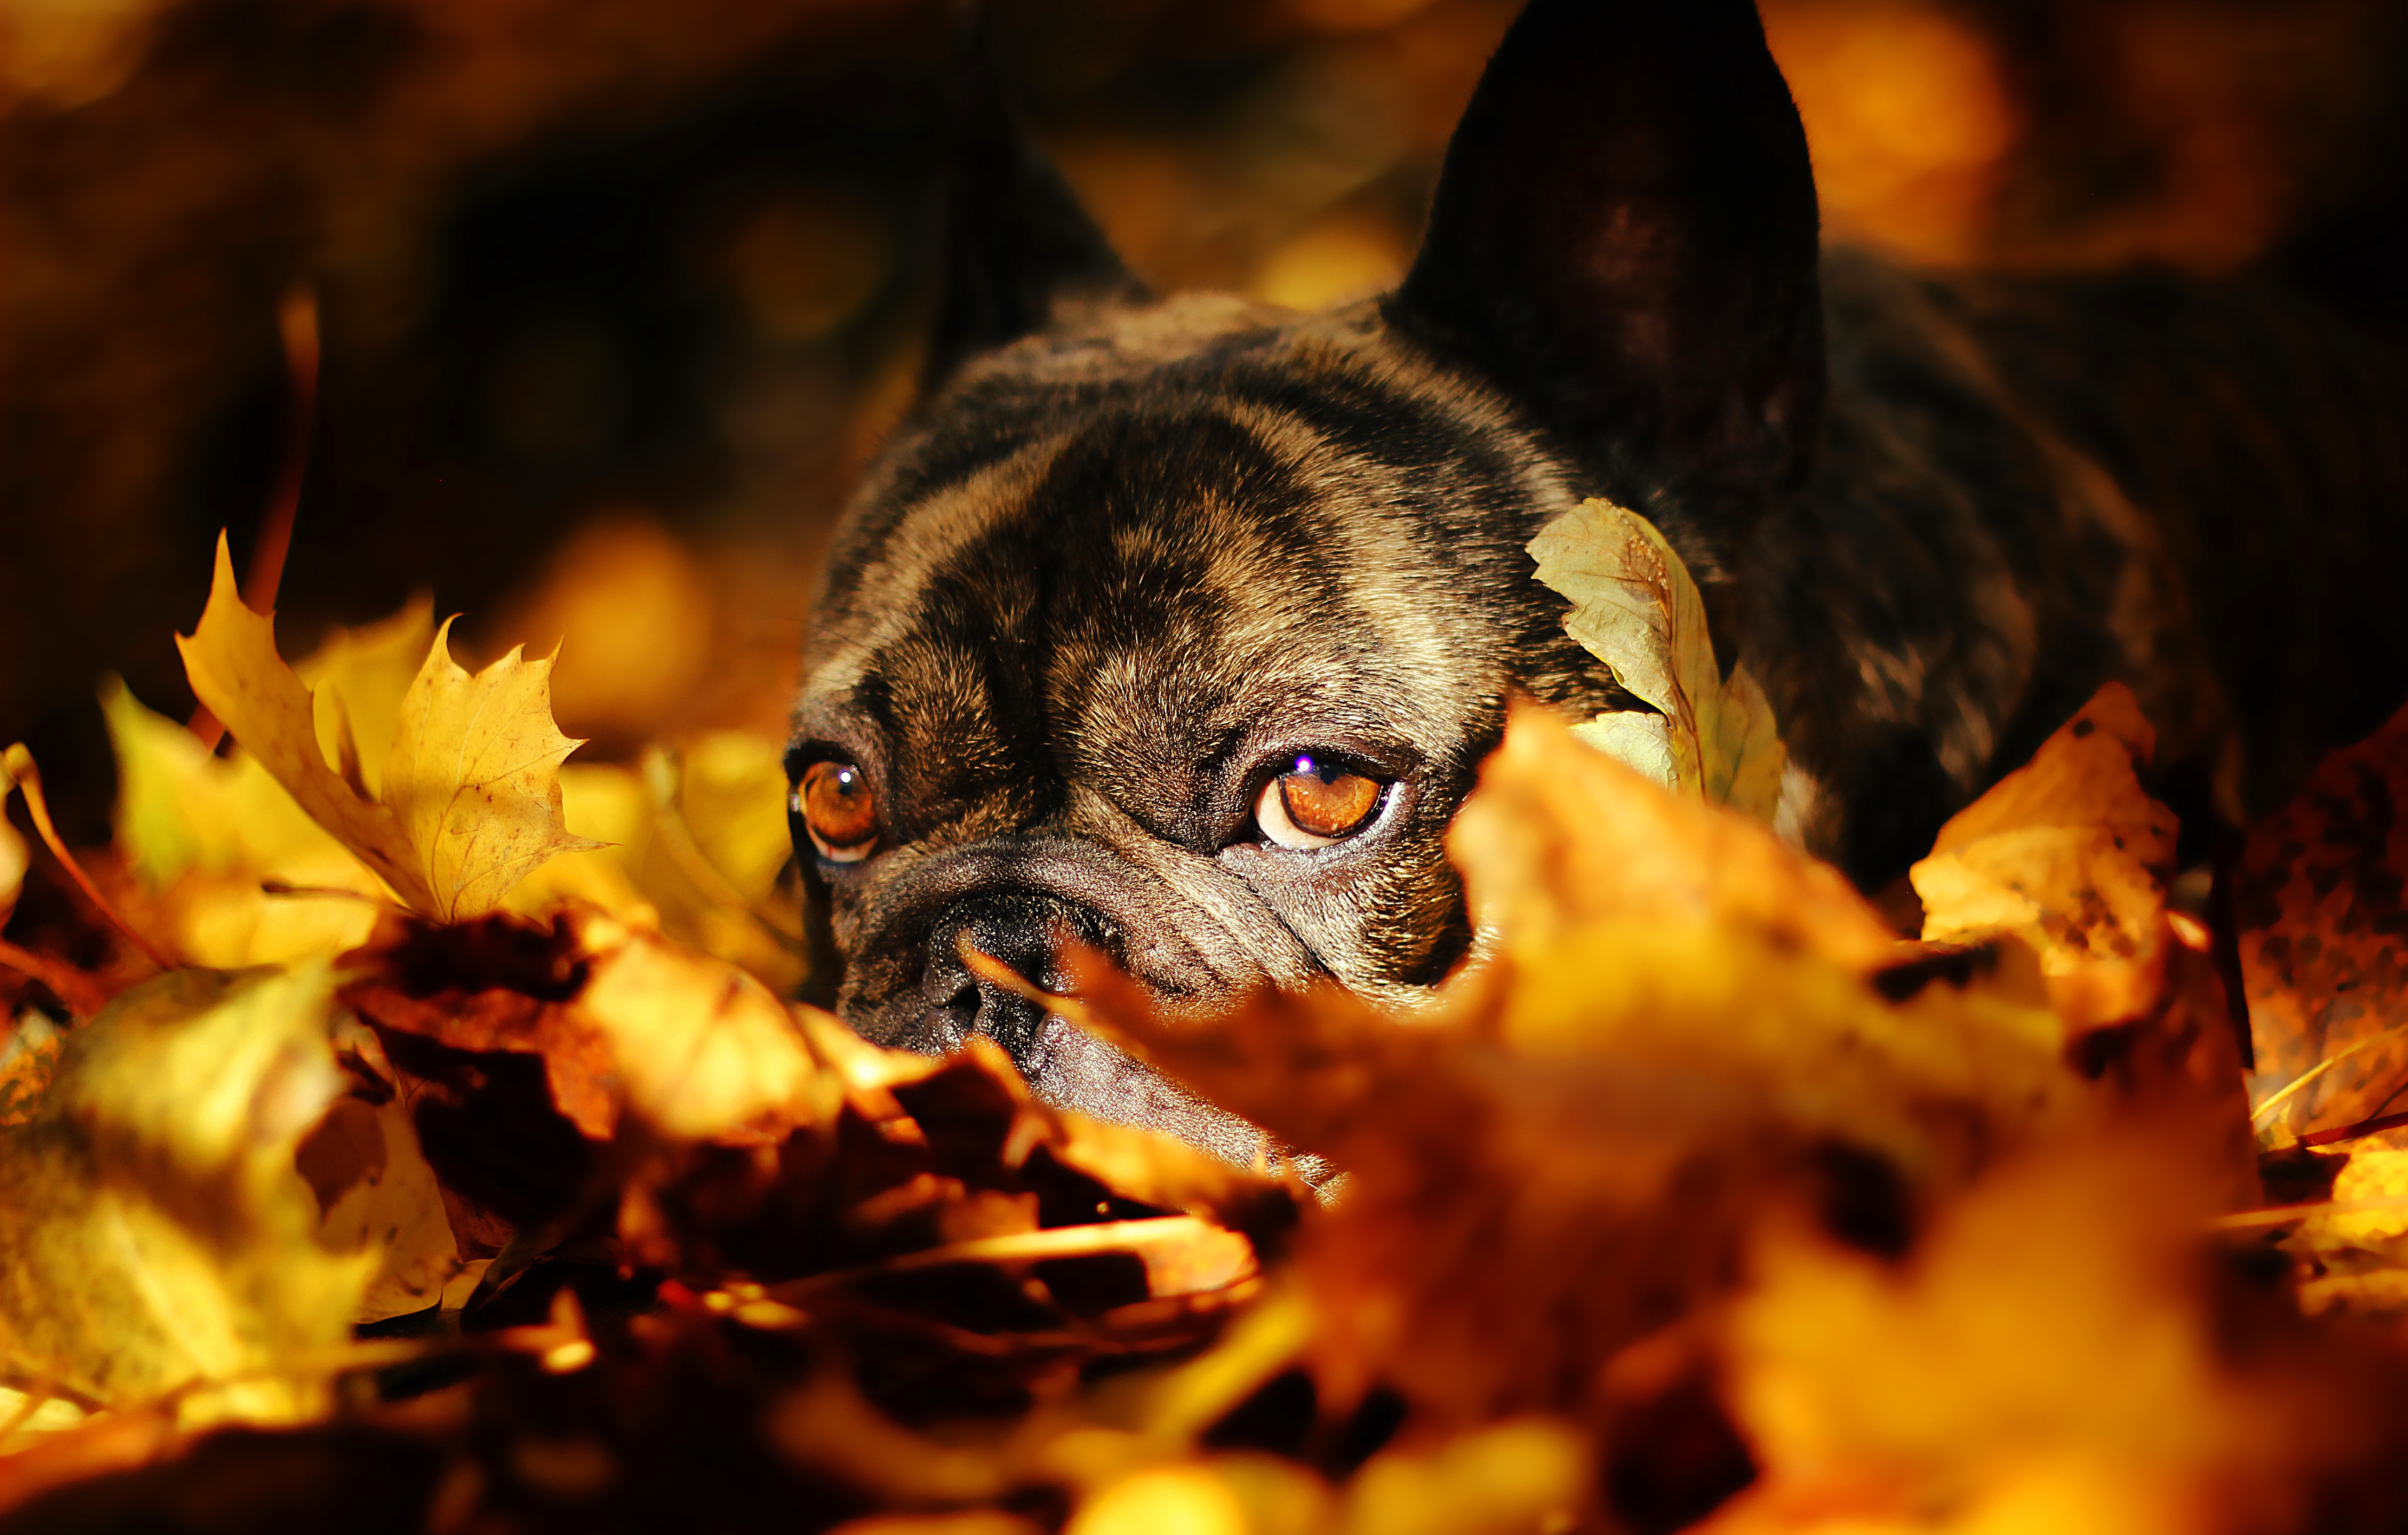 Free download wallpaper Dogs, Dog, Close Up, Leaf, Fall, Animal, French Bulldog, Lying Down on your PC desktop